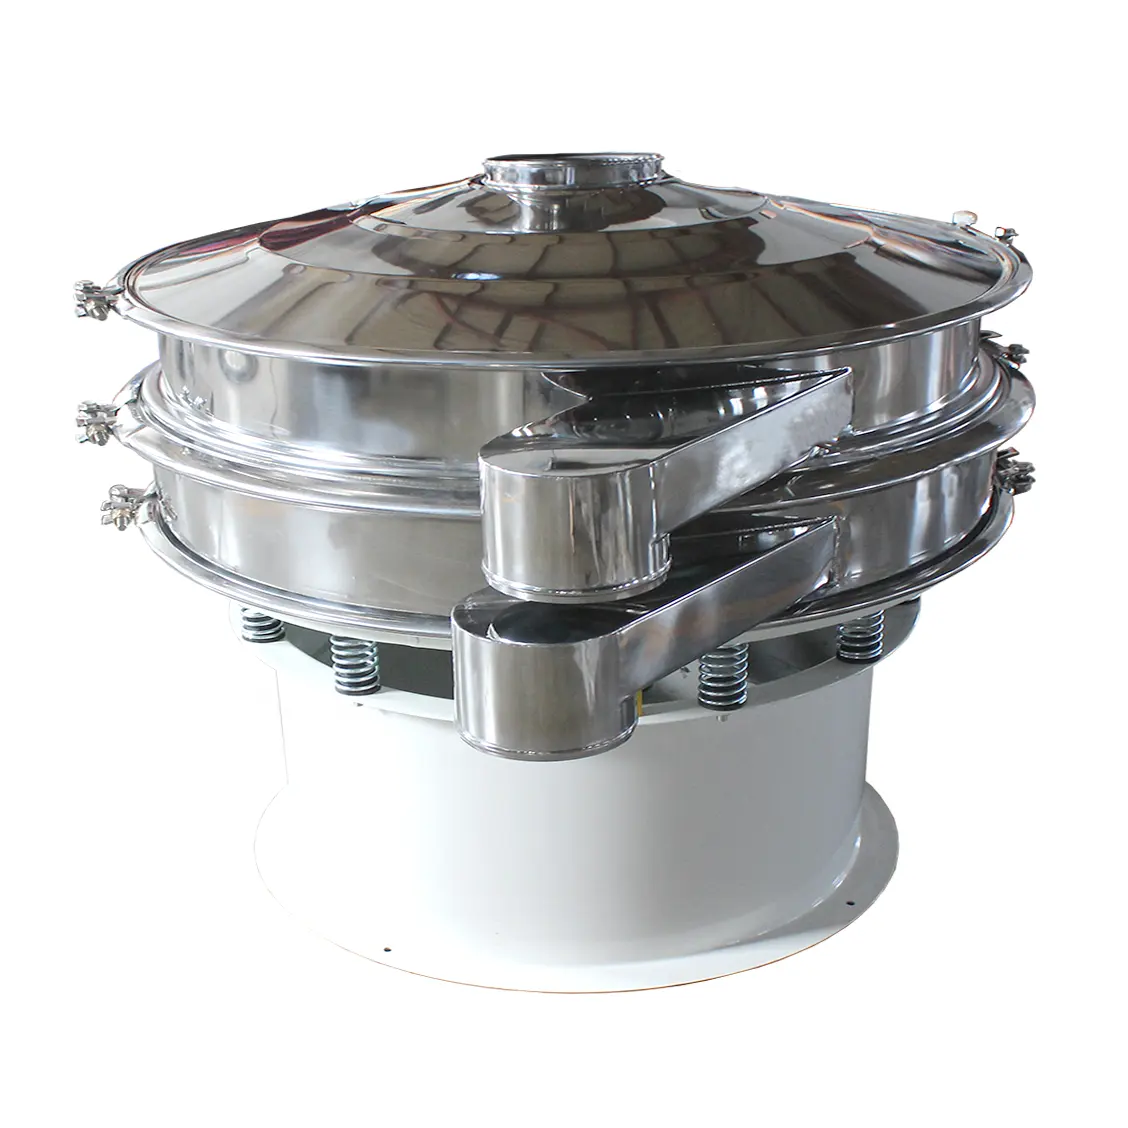 Paper pulp vibrating sieve screen vibro sifter machine